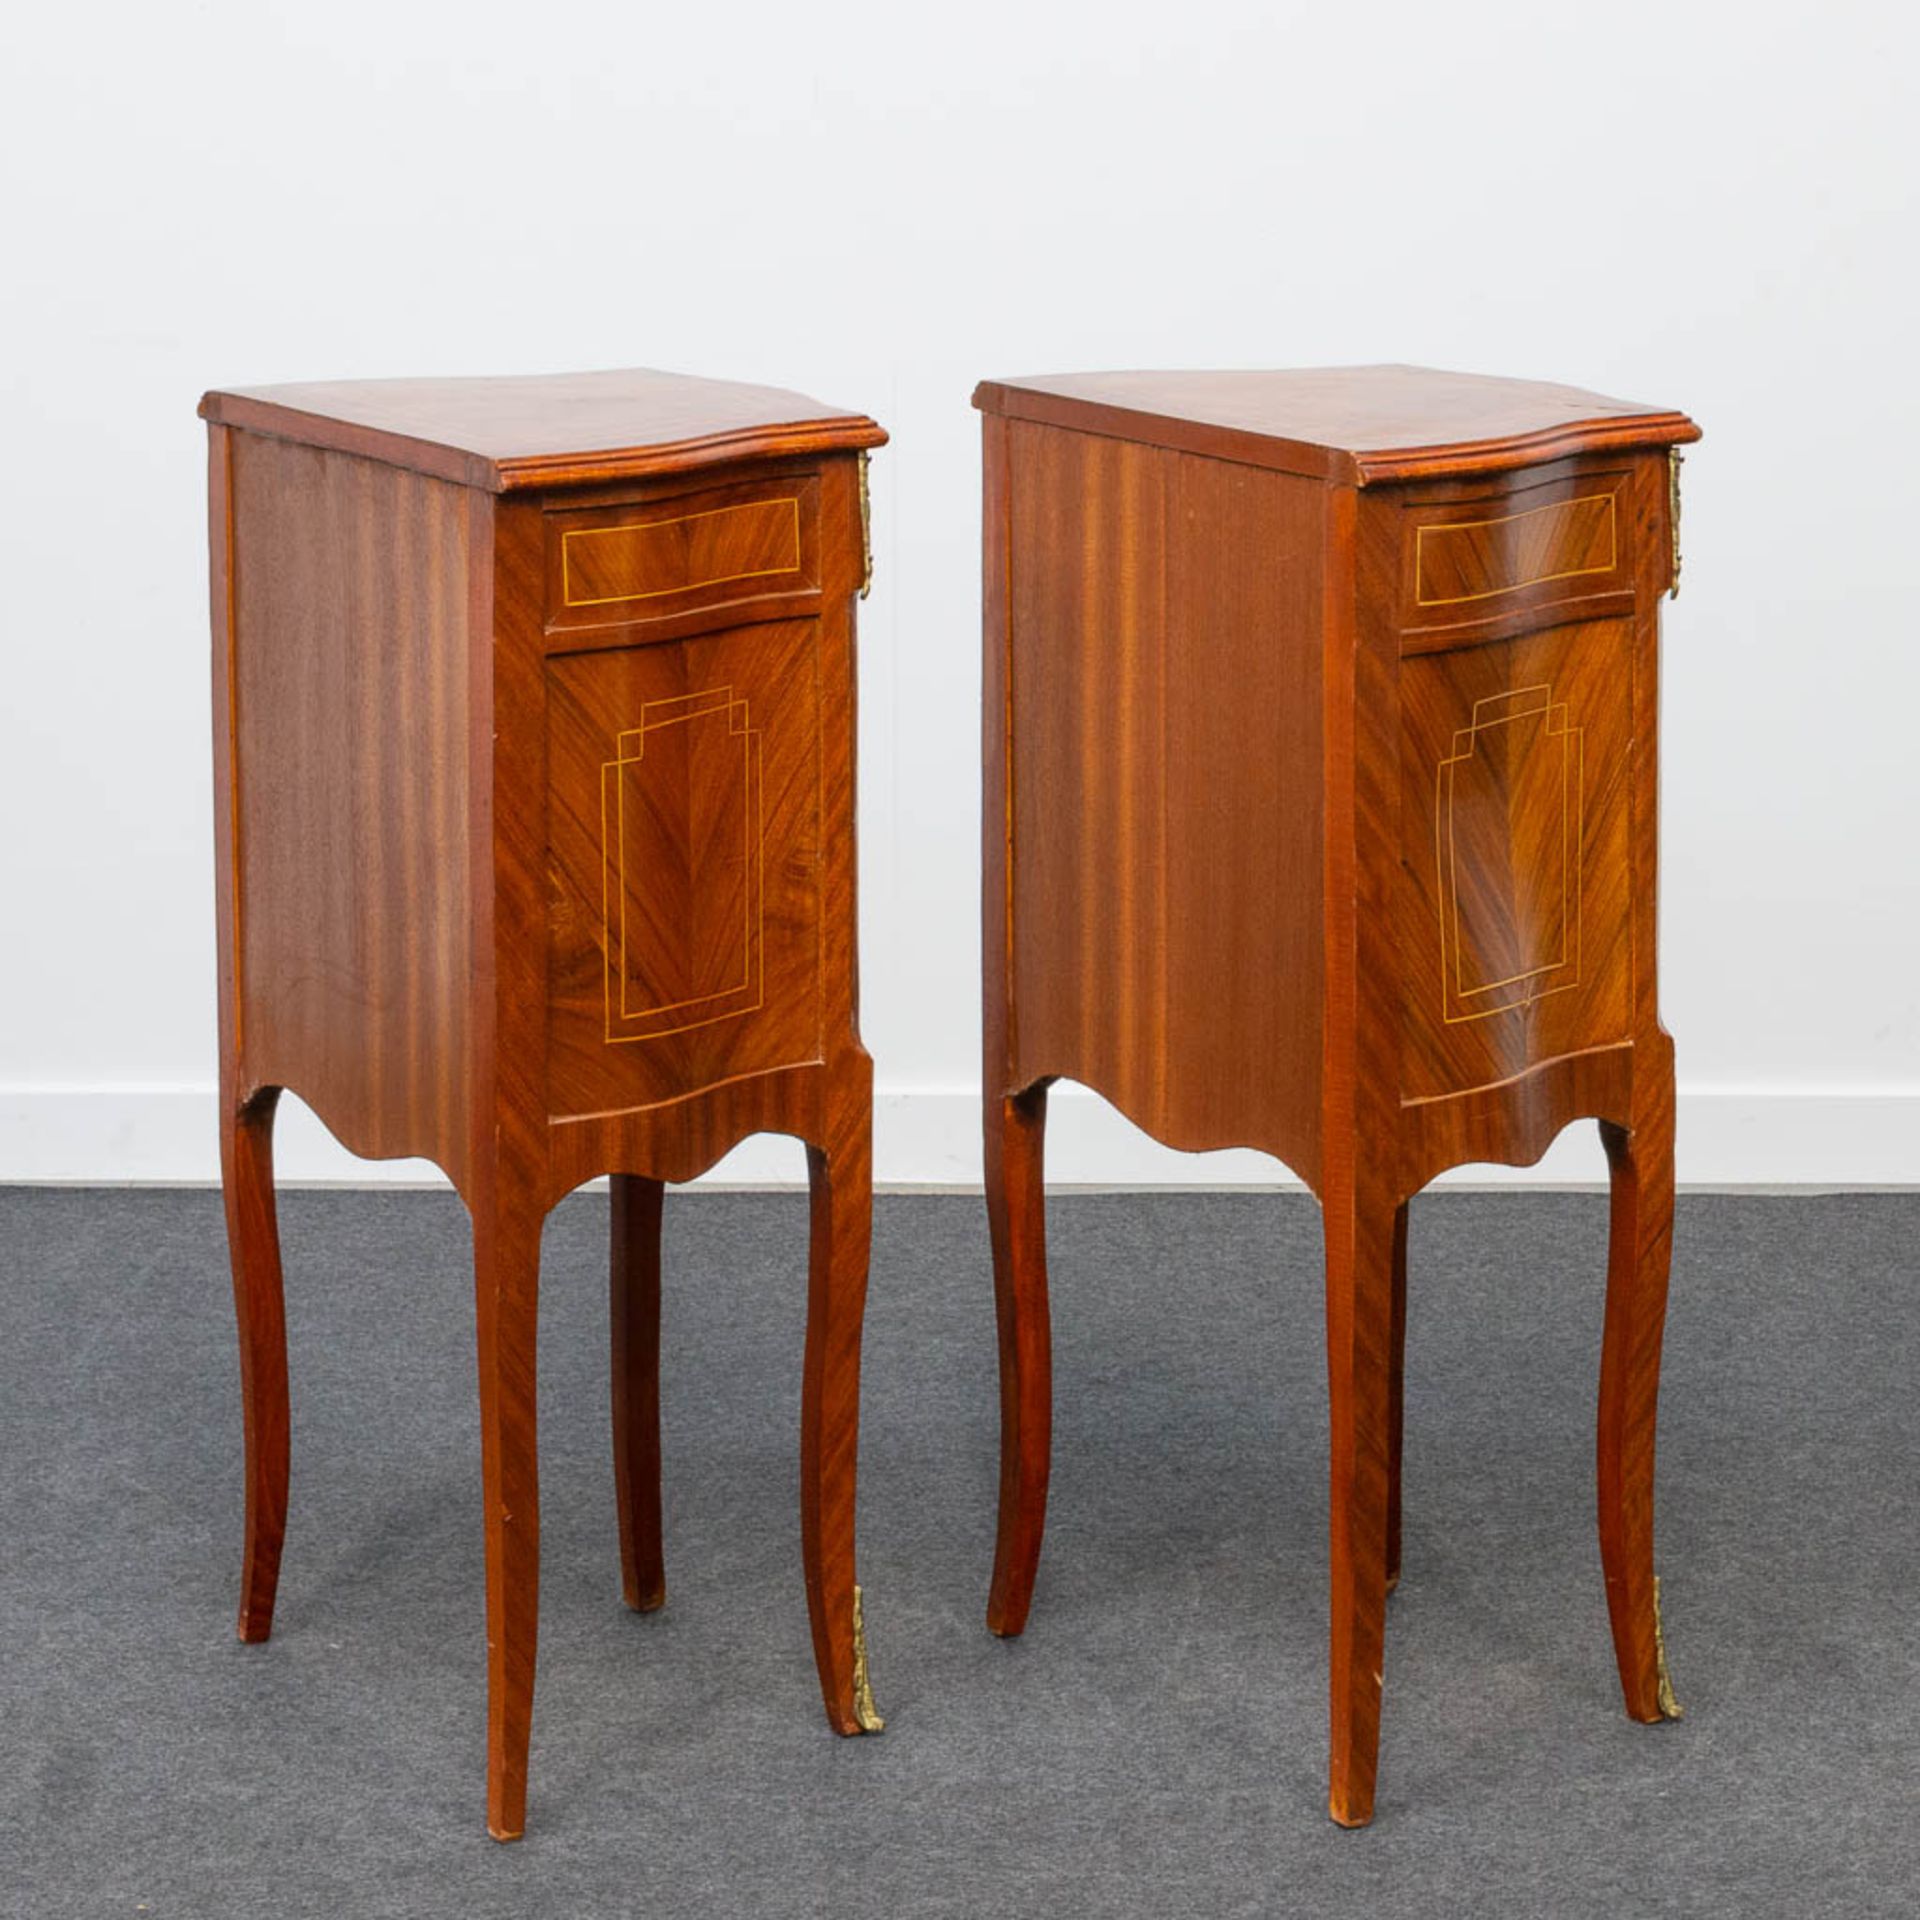 A pair of bronze mounted nightstands, inlaid with marquetry. Second half of the 20th century. - Image 8 of 22